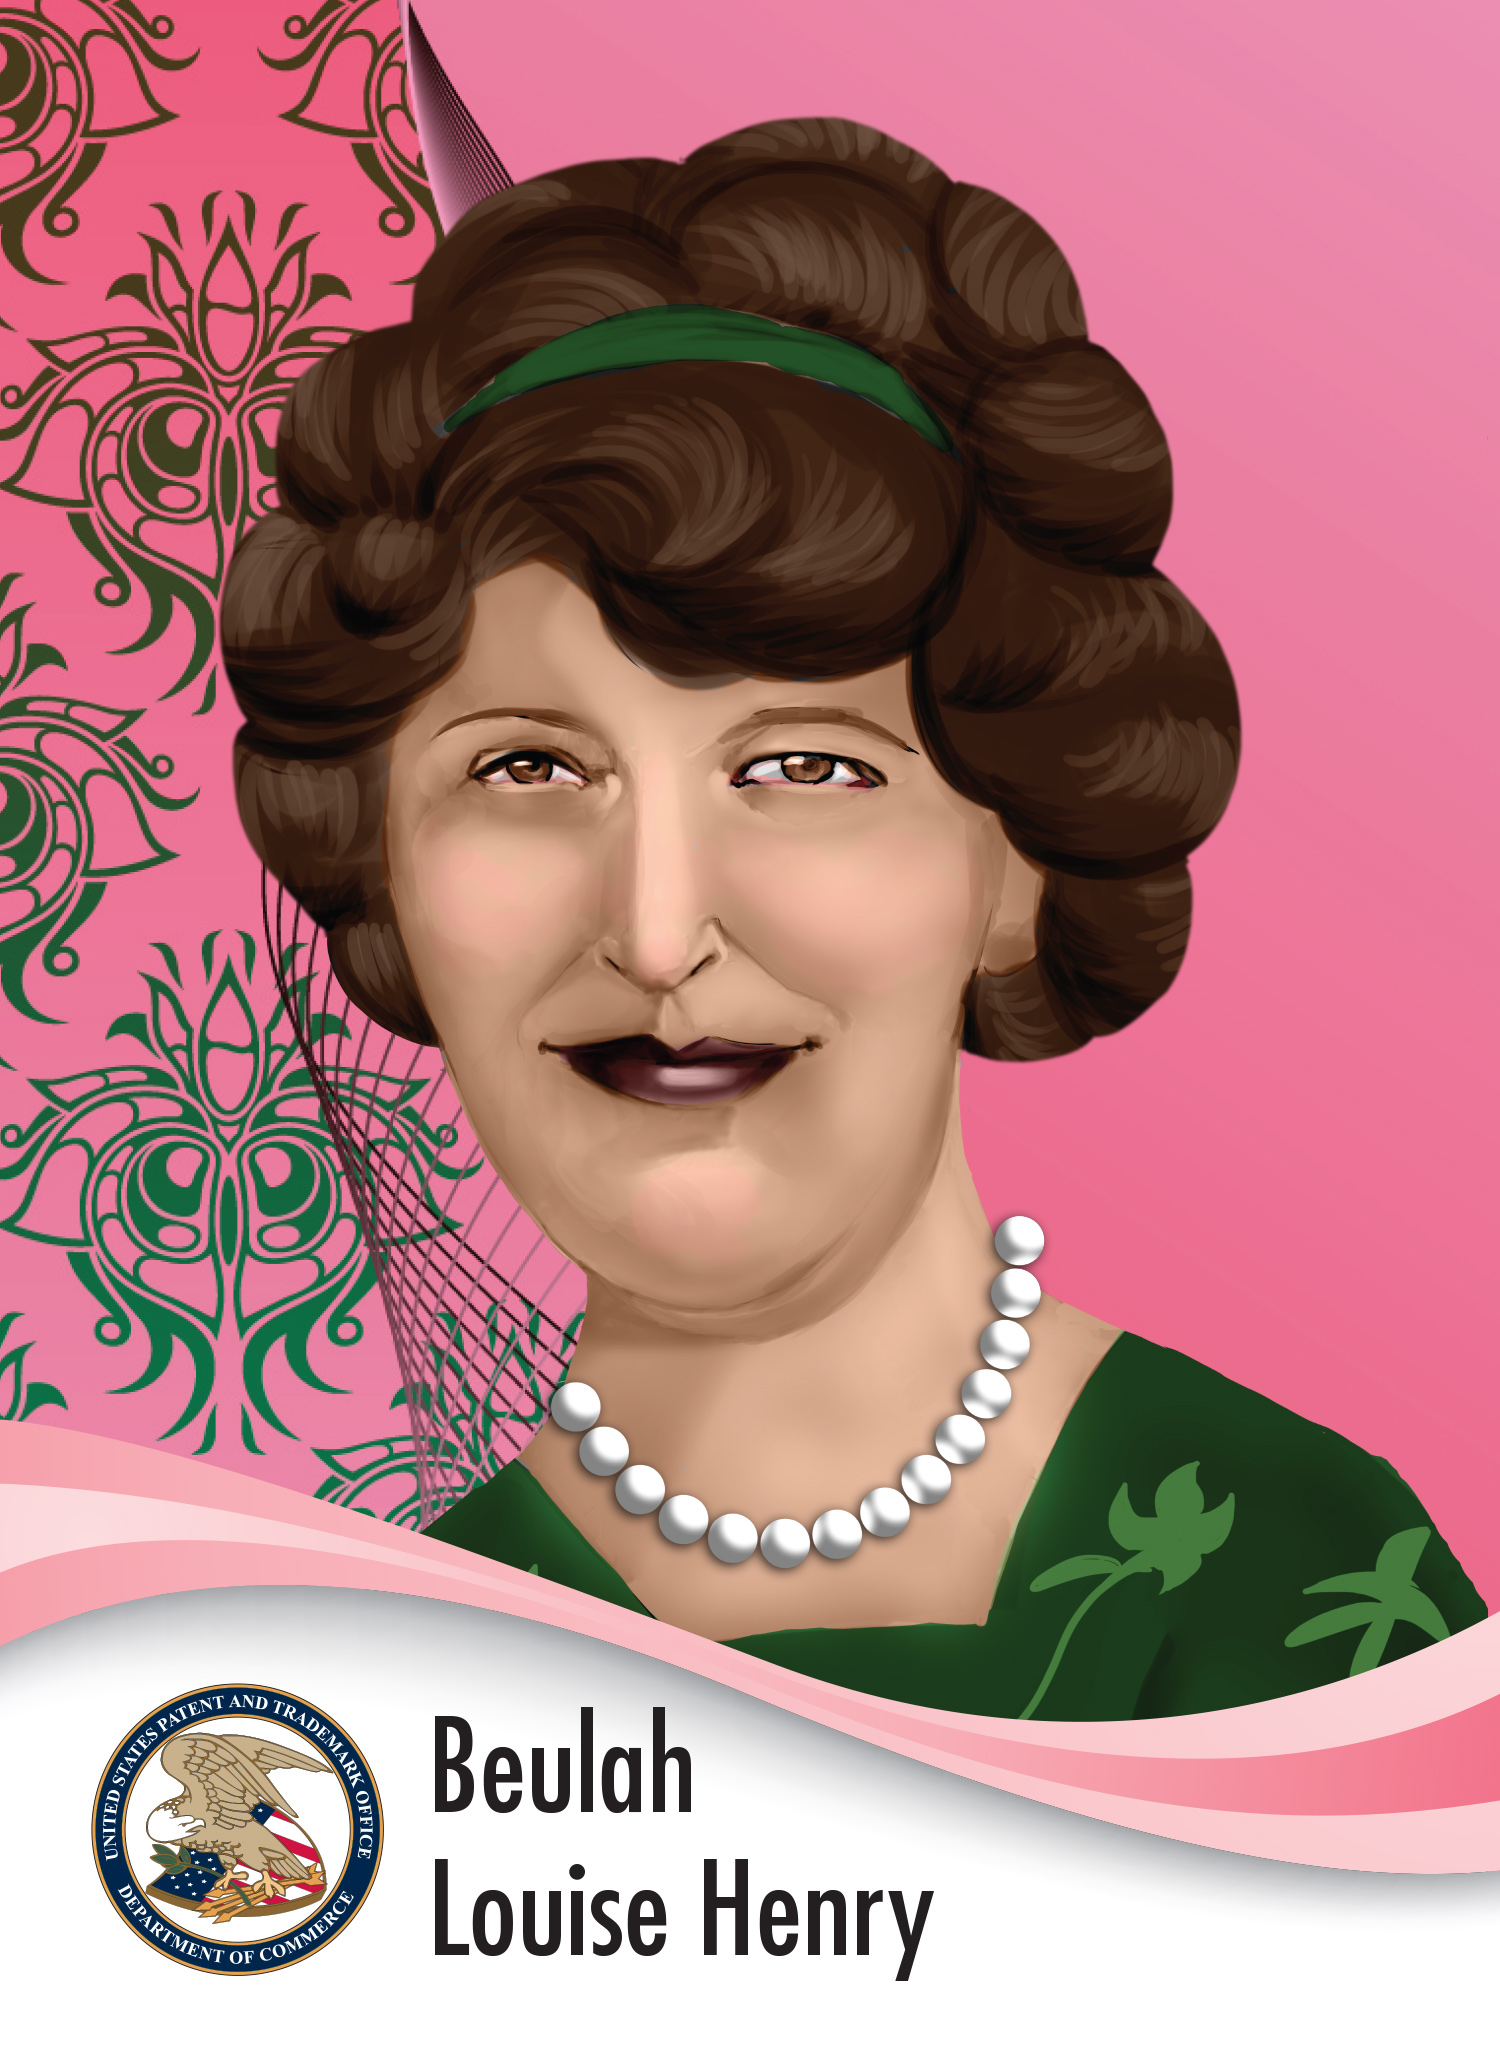 Illustration of a fashionable woman with curly hair and a pearl necklace with the name “Beulah Louise Henry” 